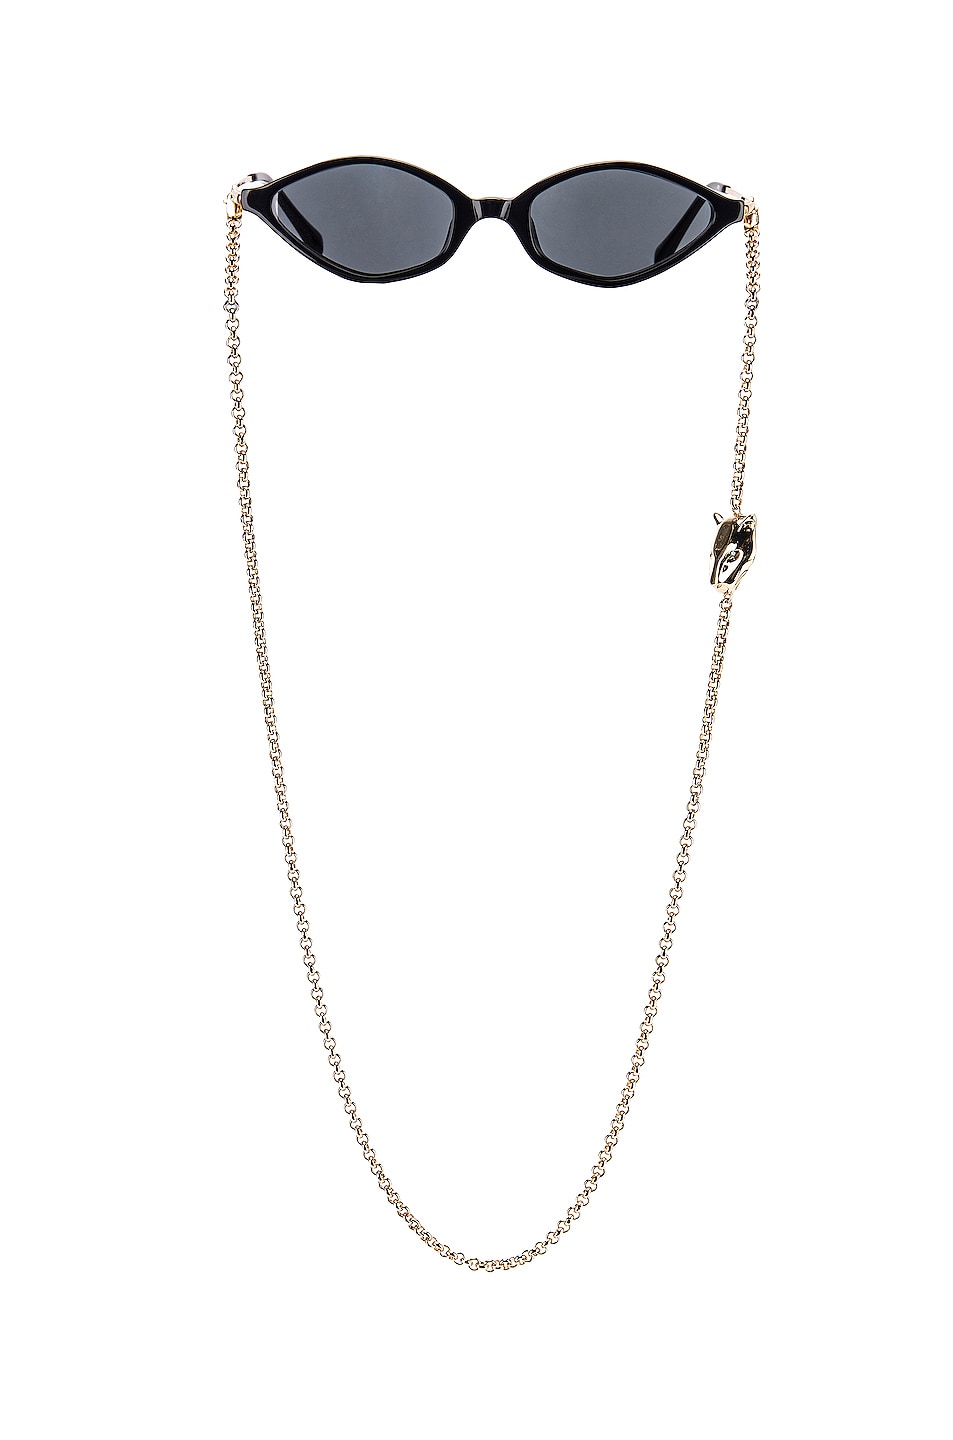 Image 1 of Alessandra Rich Small Cateye Sunglasses in Black, Yellow Gold & Grey